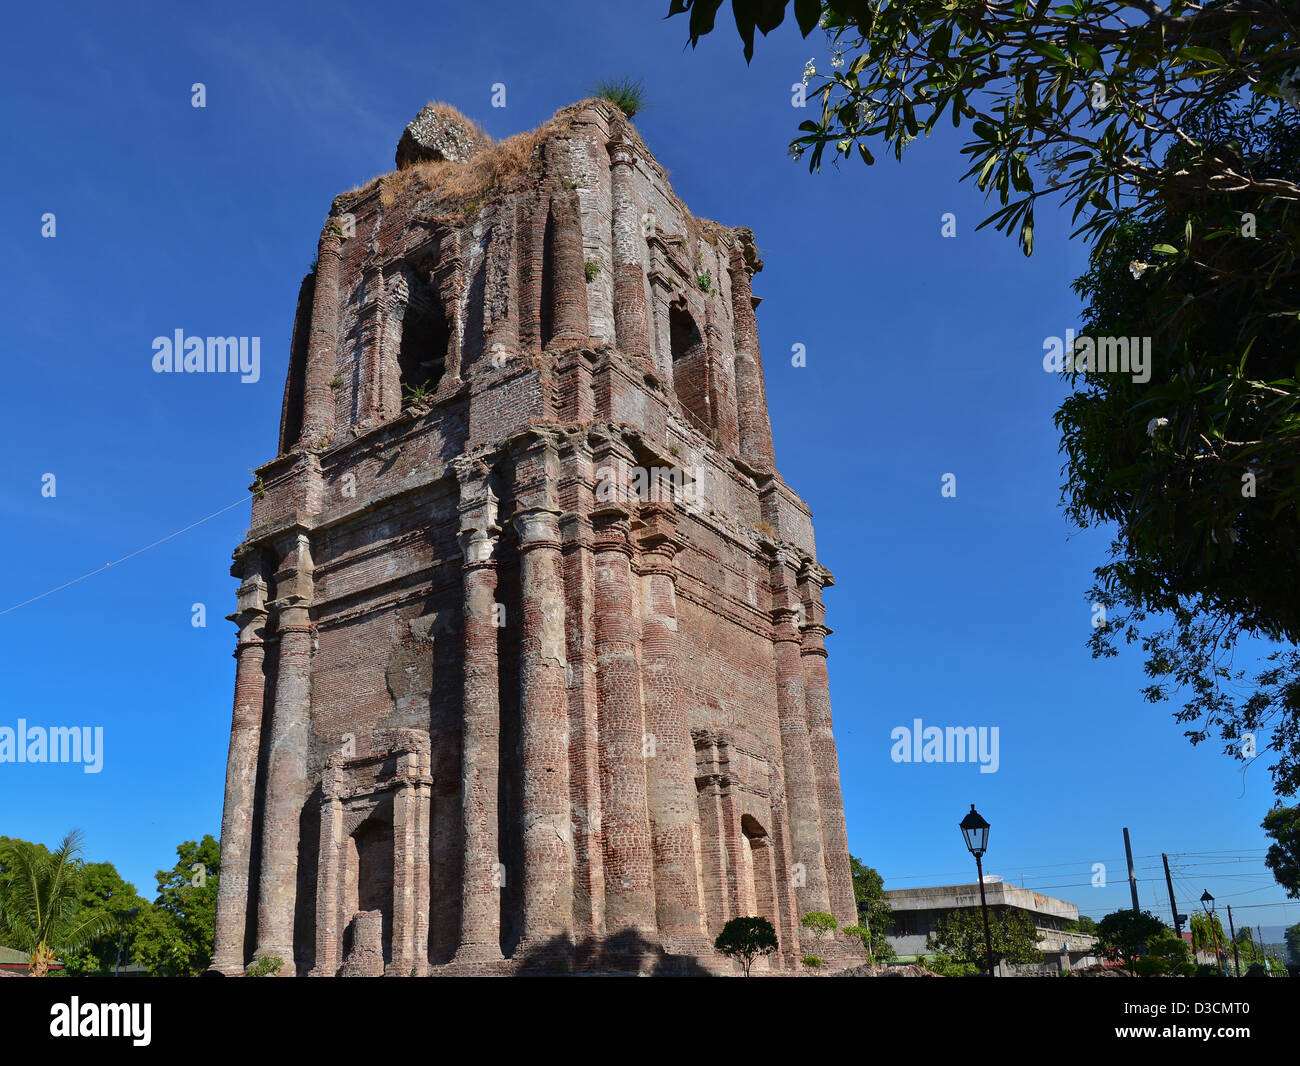 Domeless (felled by earthquake) Bell Tower of the Bacarra Church - Ilocos Norte, Philippines Stock Photo